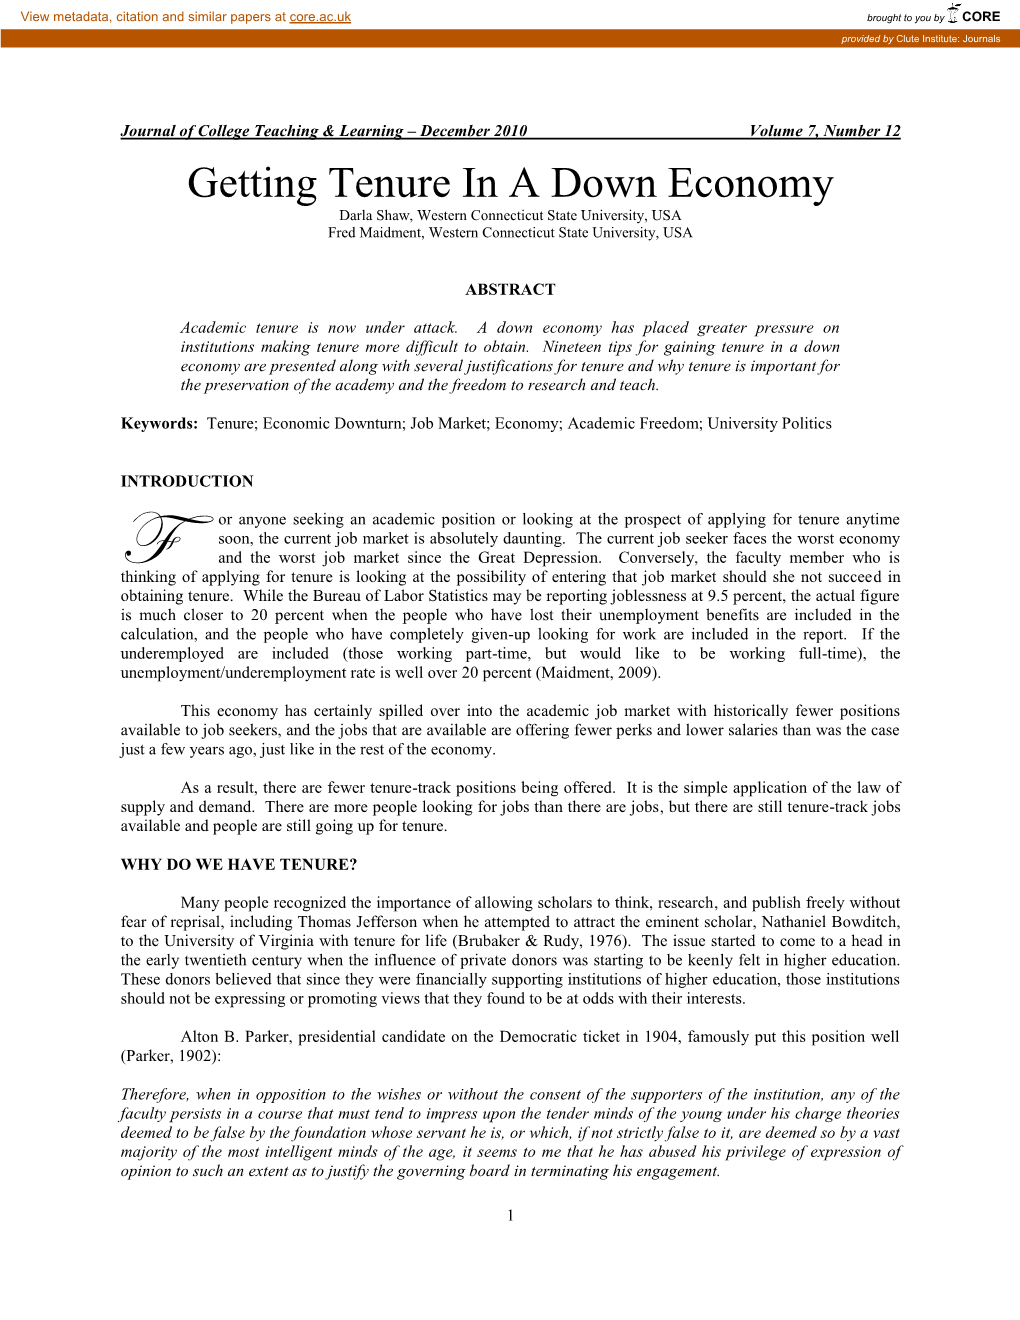 Getting Tenure in a Down Economy Darla Shaw, Western Connecticut State University, USA Fred Maidment, Western Connecticut State University, USA